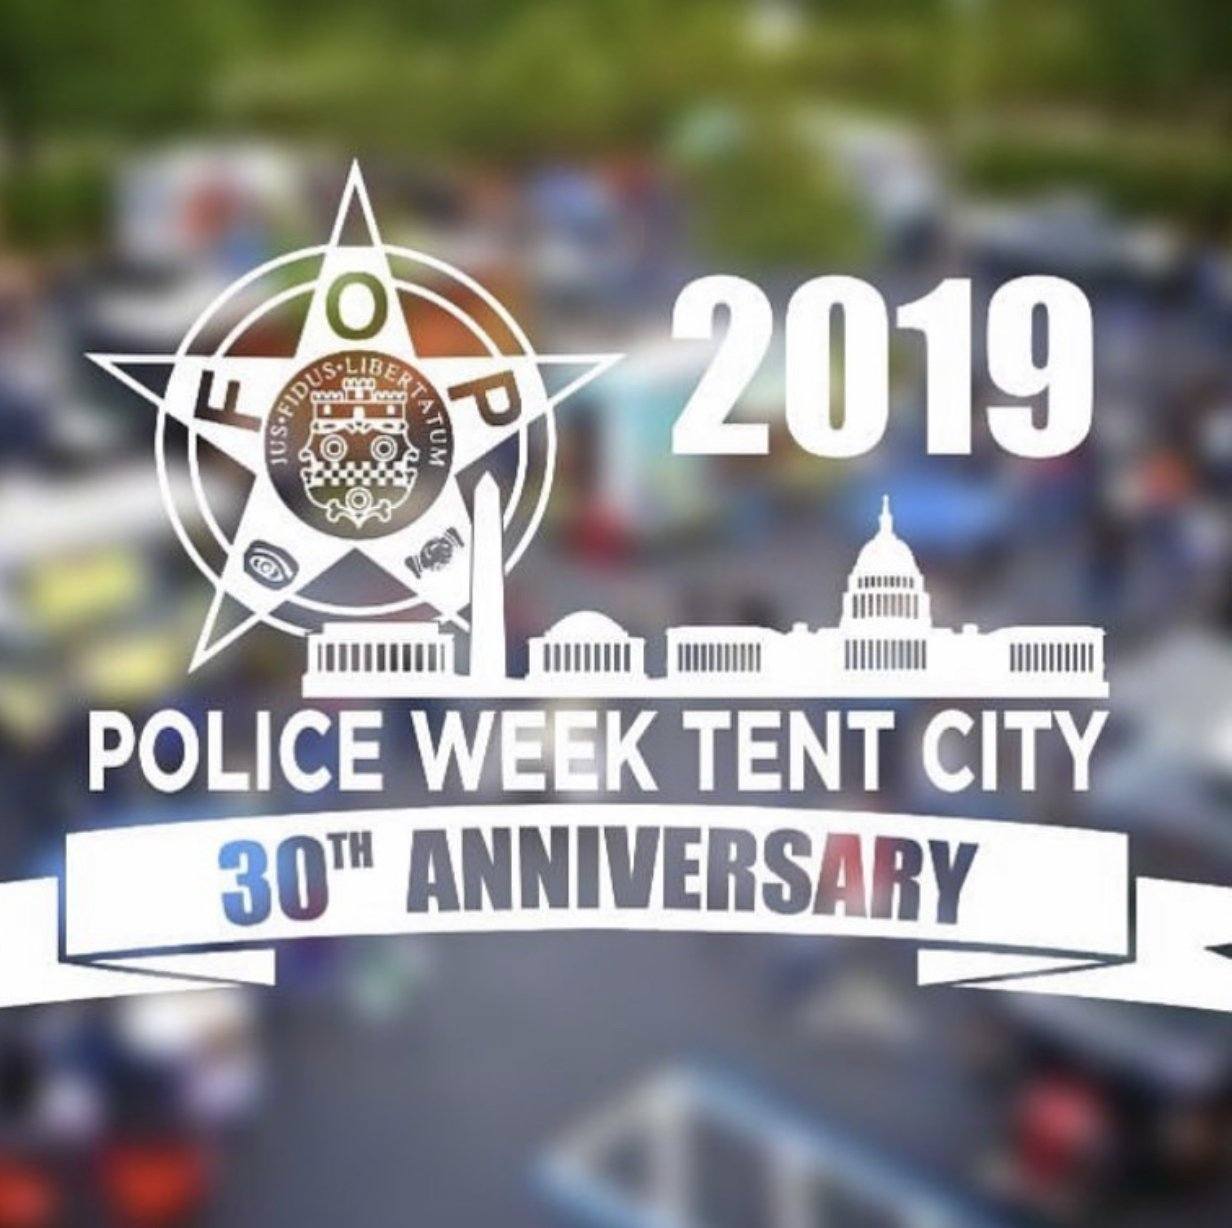 Police Week 2019 Washington, D.C. - Tent City - Times - Dates - Location - Schedules - Directions